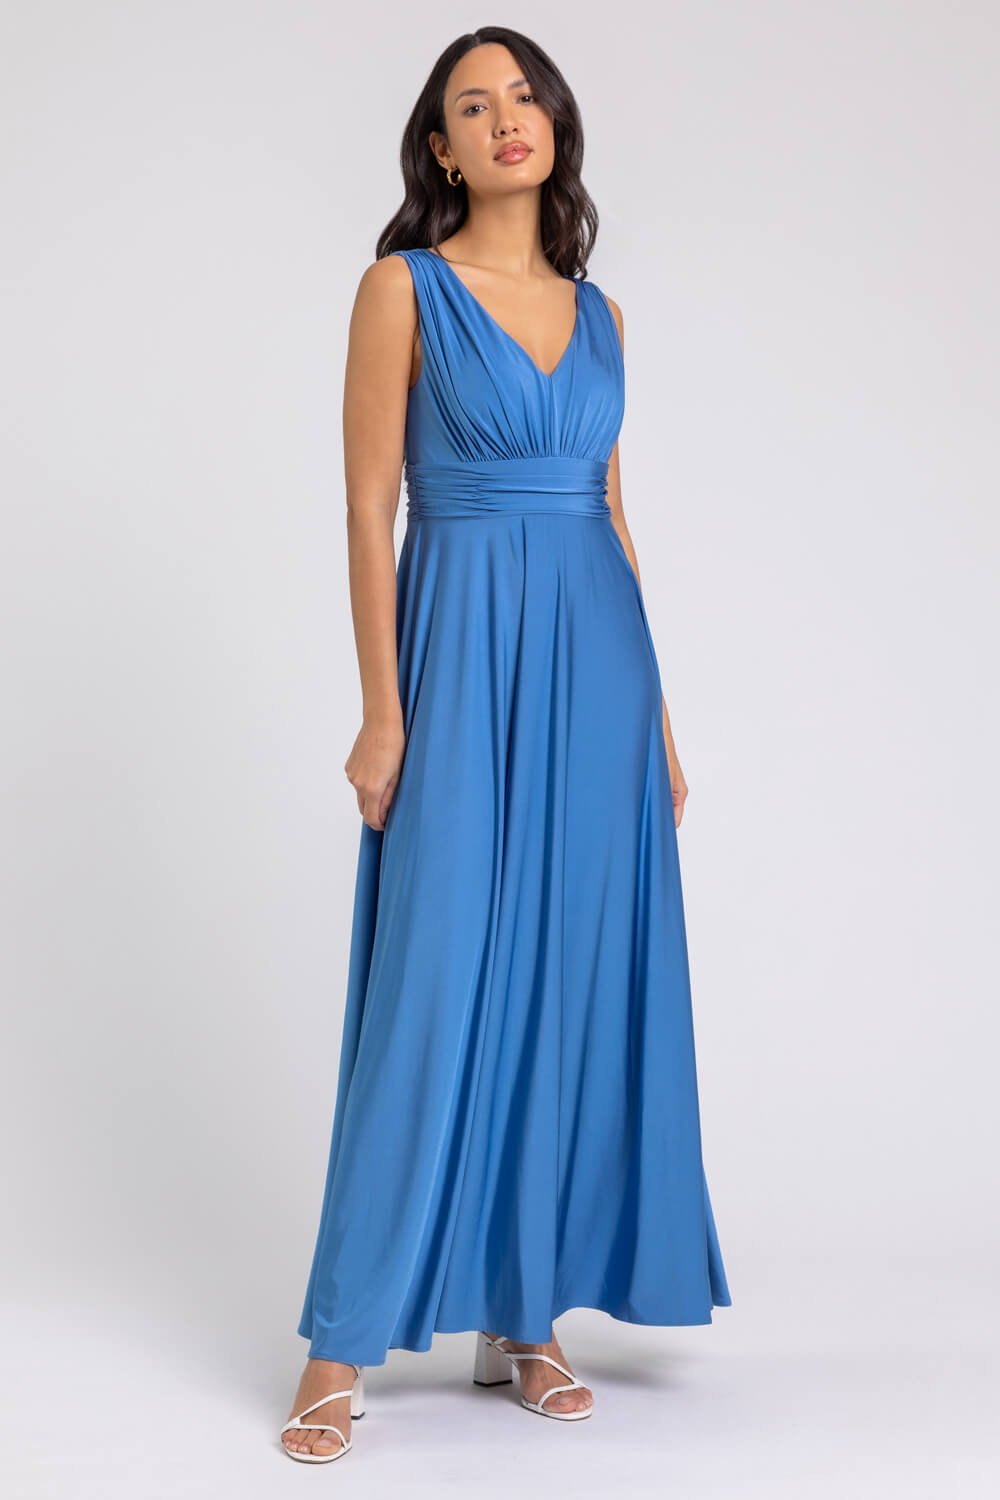 Blue Ruched Sleeveless Stretch Maxi Dress, Image 5 of 5